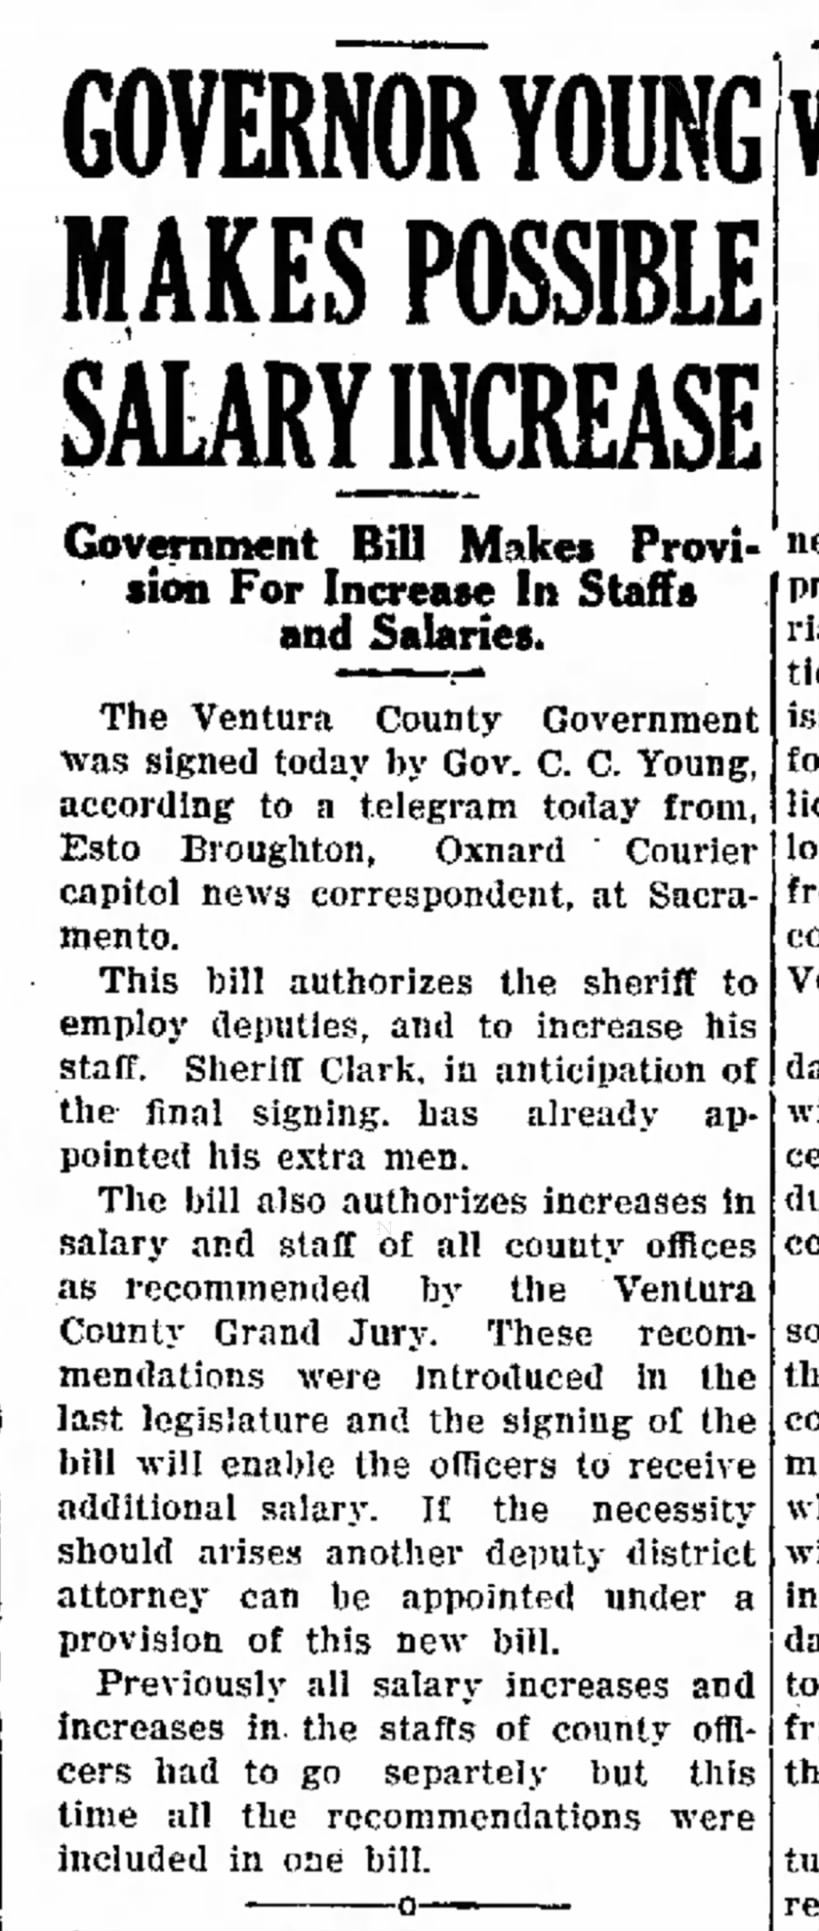 Oxnard Courier - 1927 May 14 - Government Bill Signed